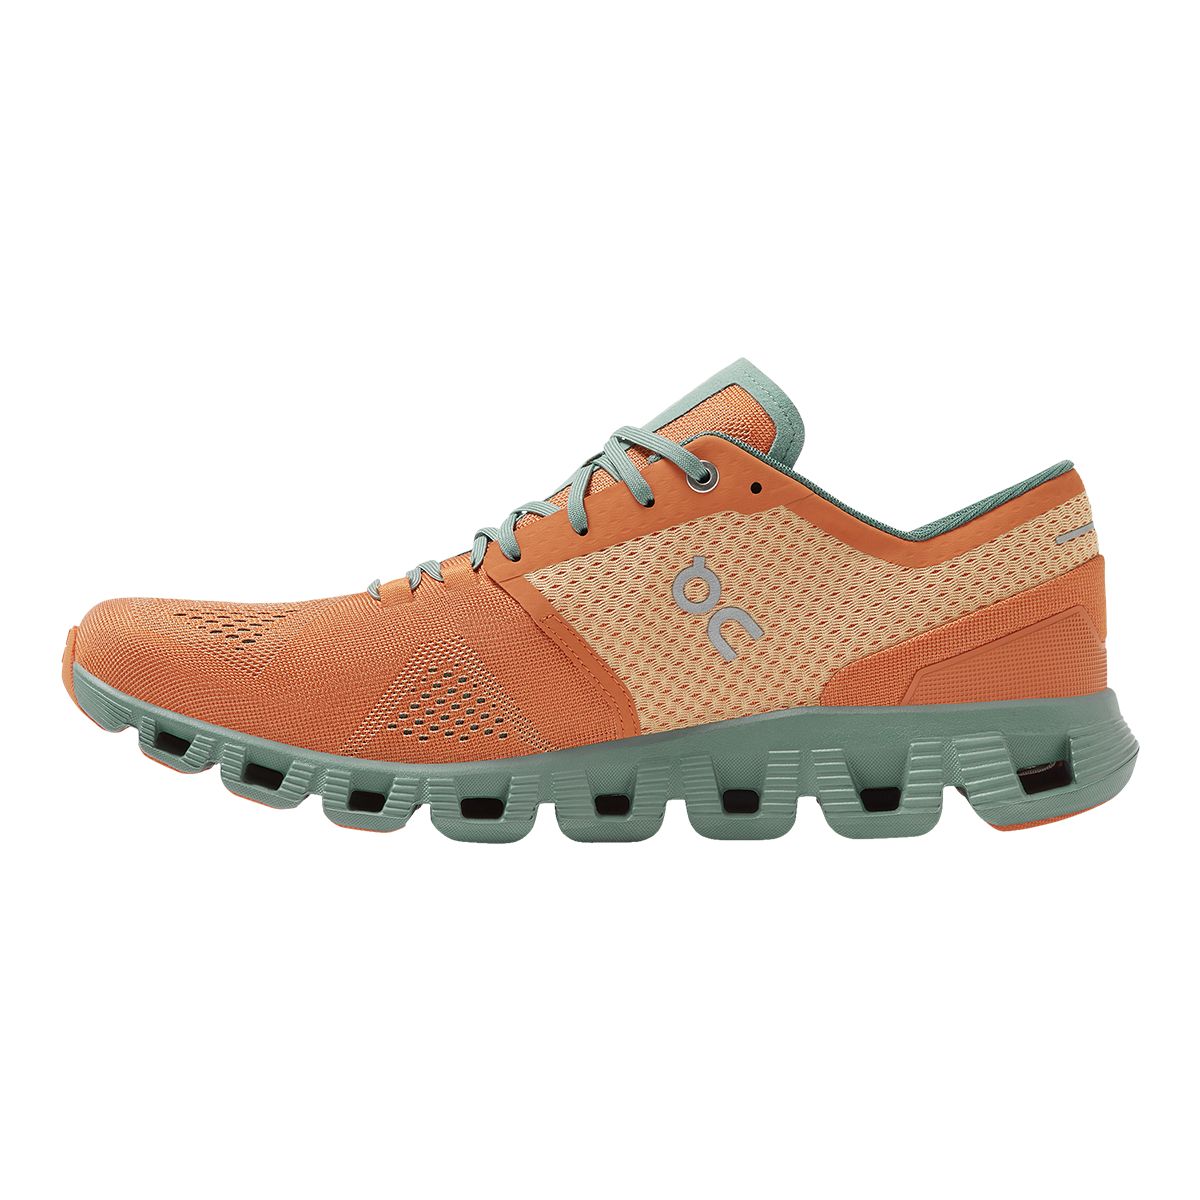 On Men's Cloud Cloud X Running Shoes, Breathable, Mesh